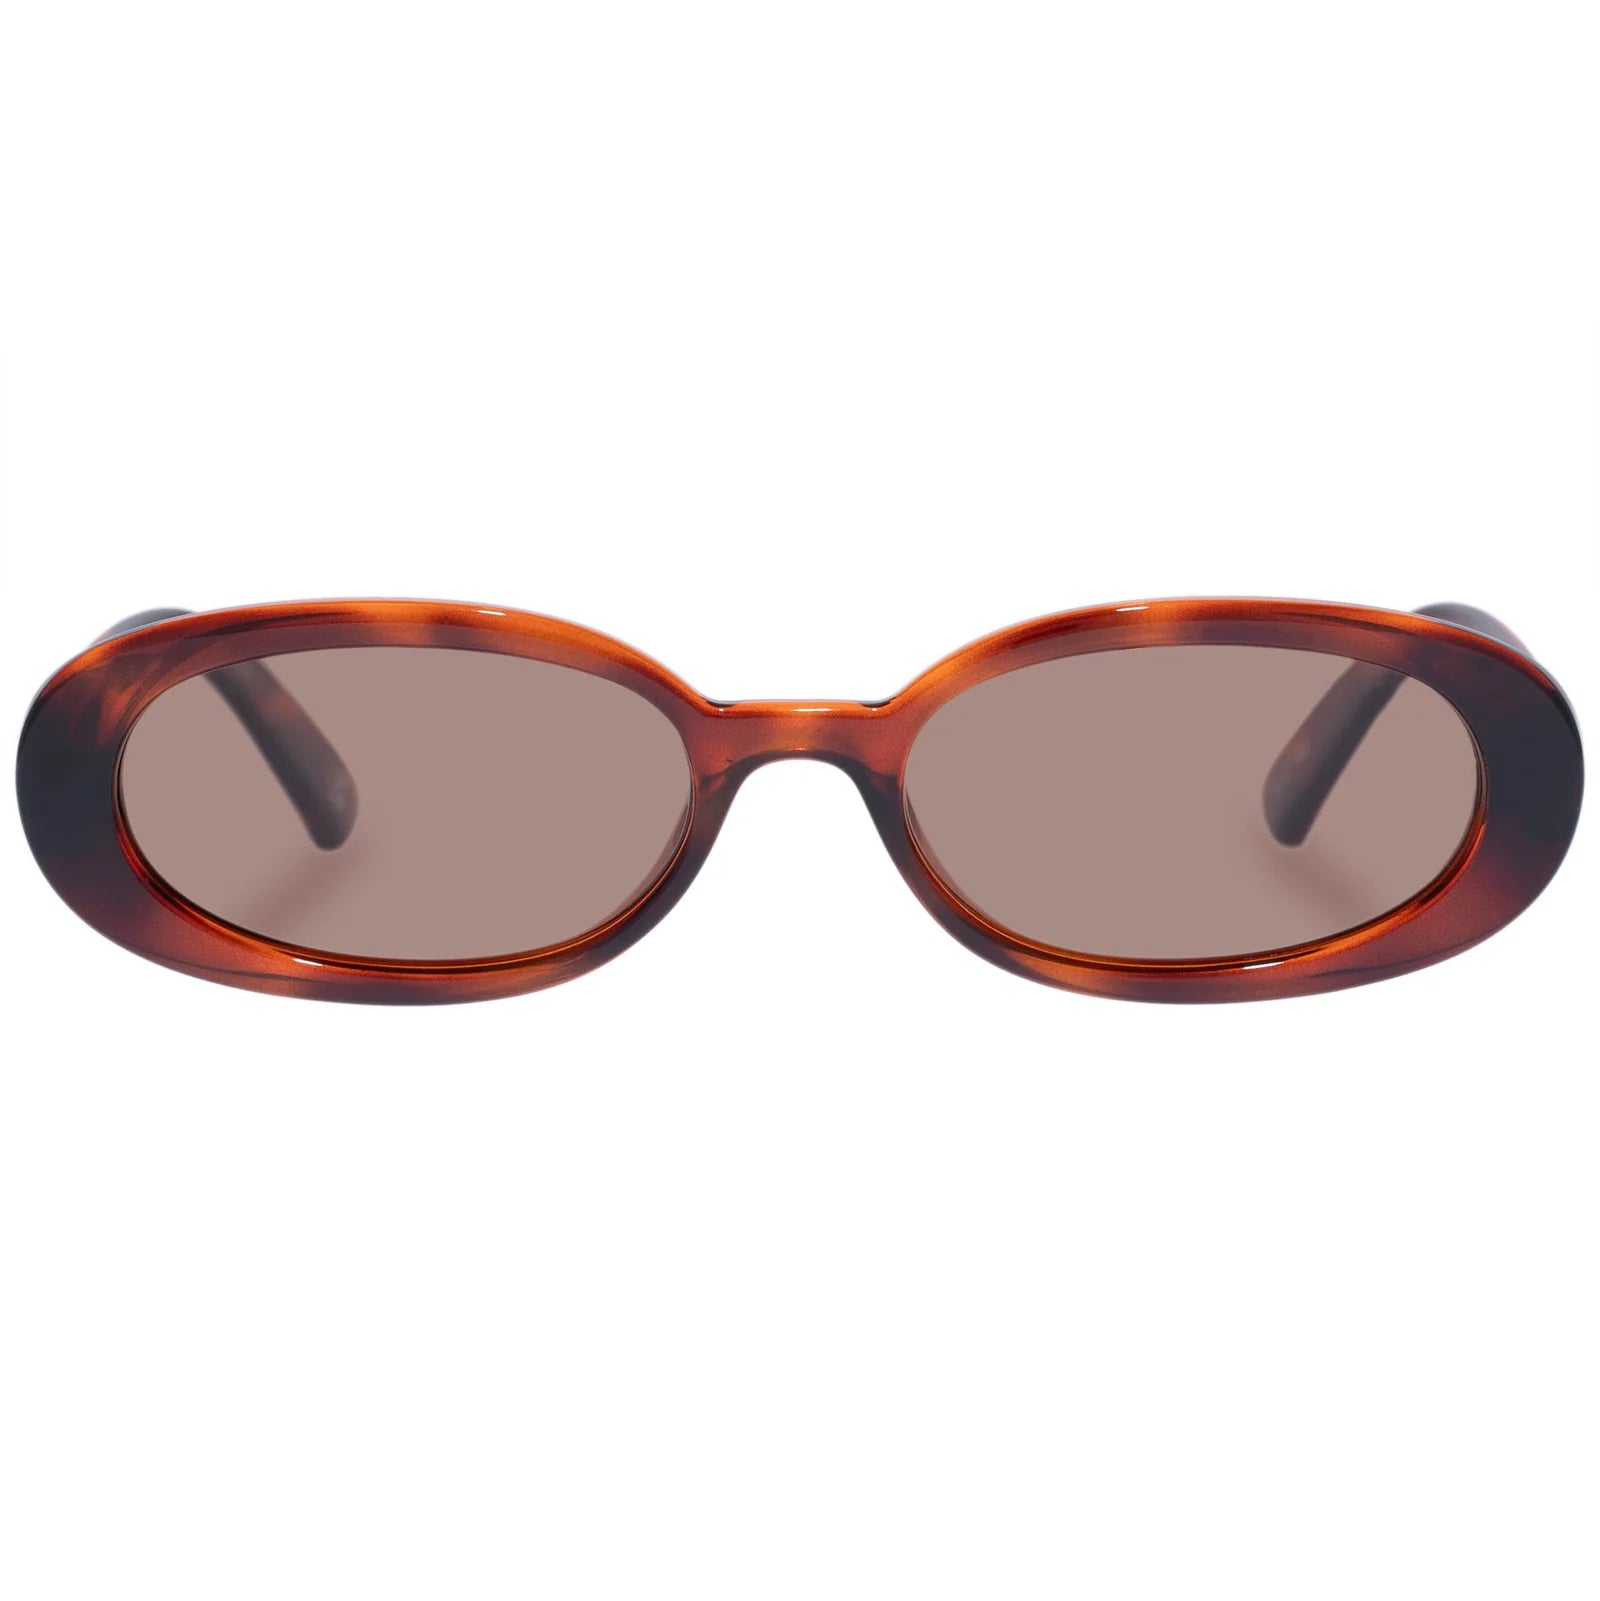 Le Specs Sunglasses - Outta Love - Toffee Tort